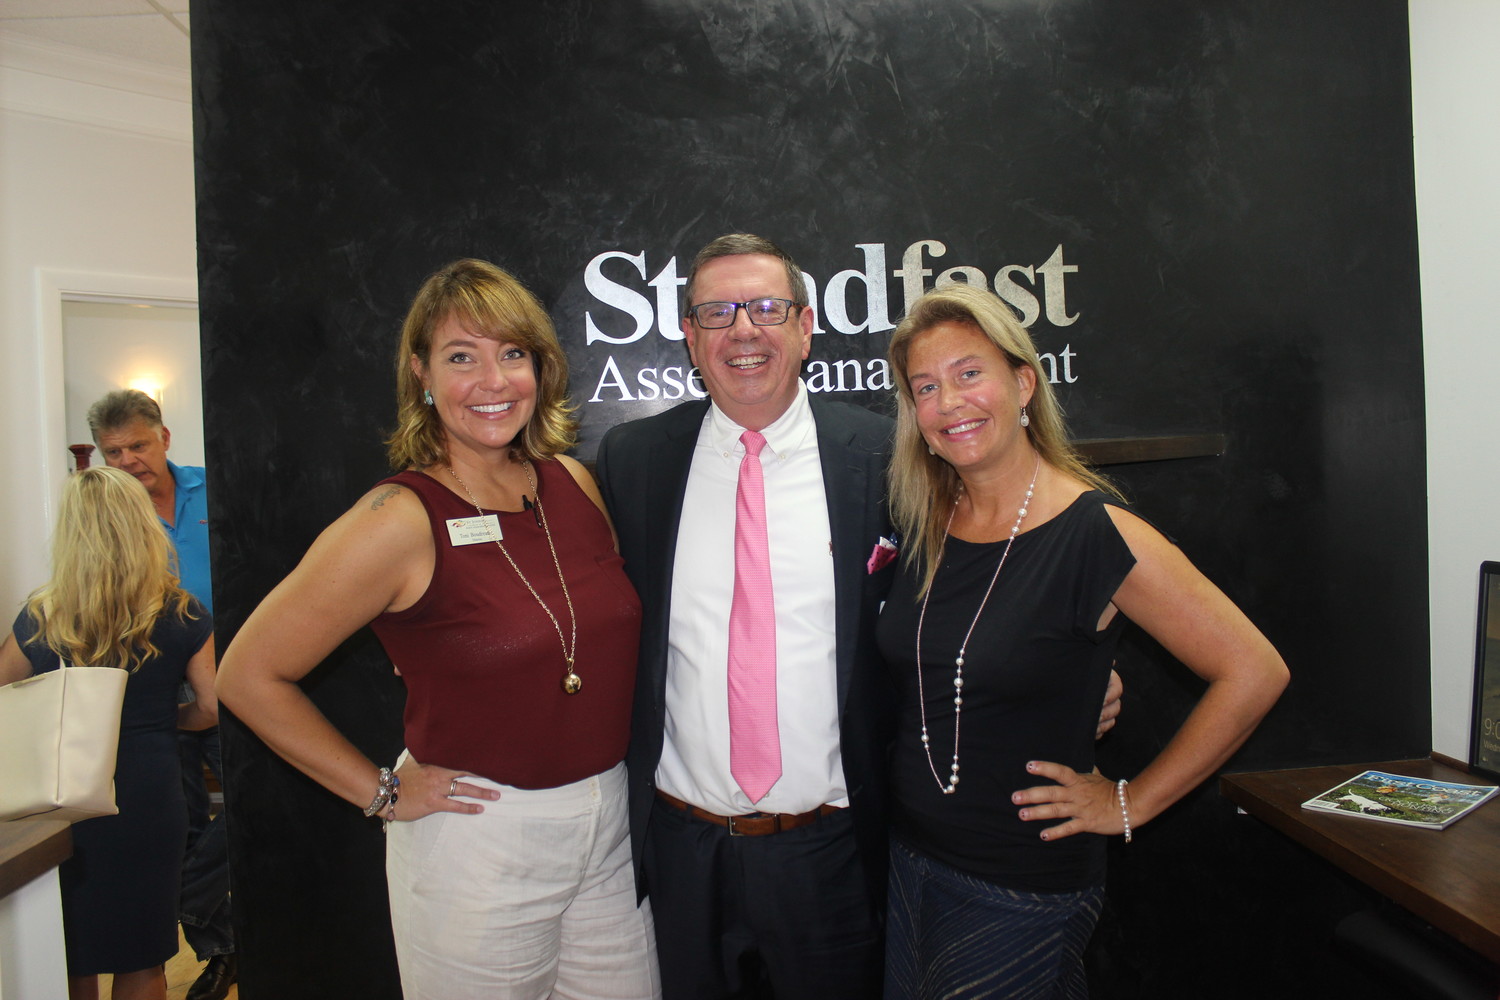 Toni Boudreaux, Scott Grant and Jennifer Price gather at the Chamber “Before Hours” at Standfast Asset Management July 11.